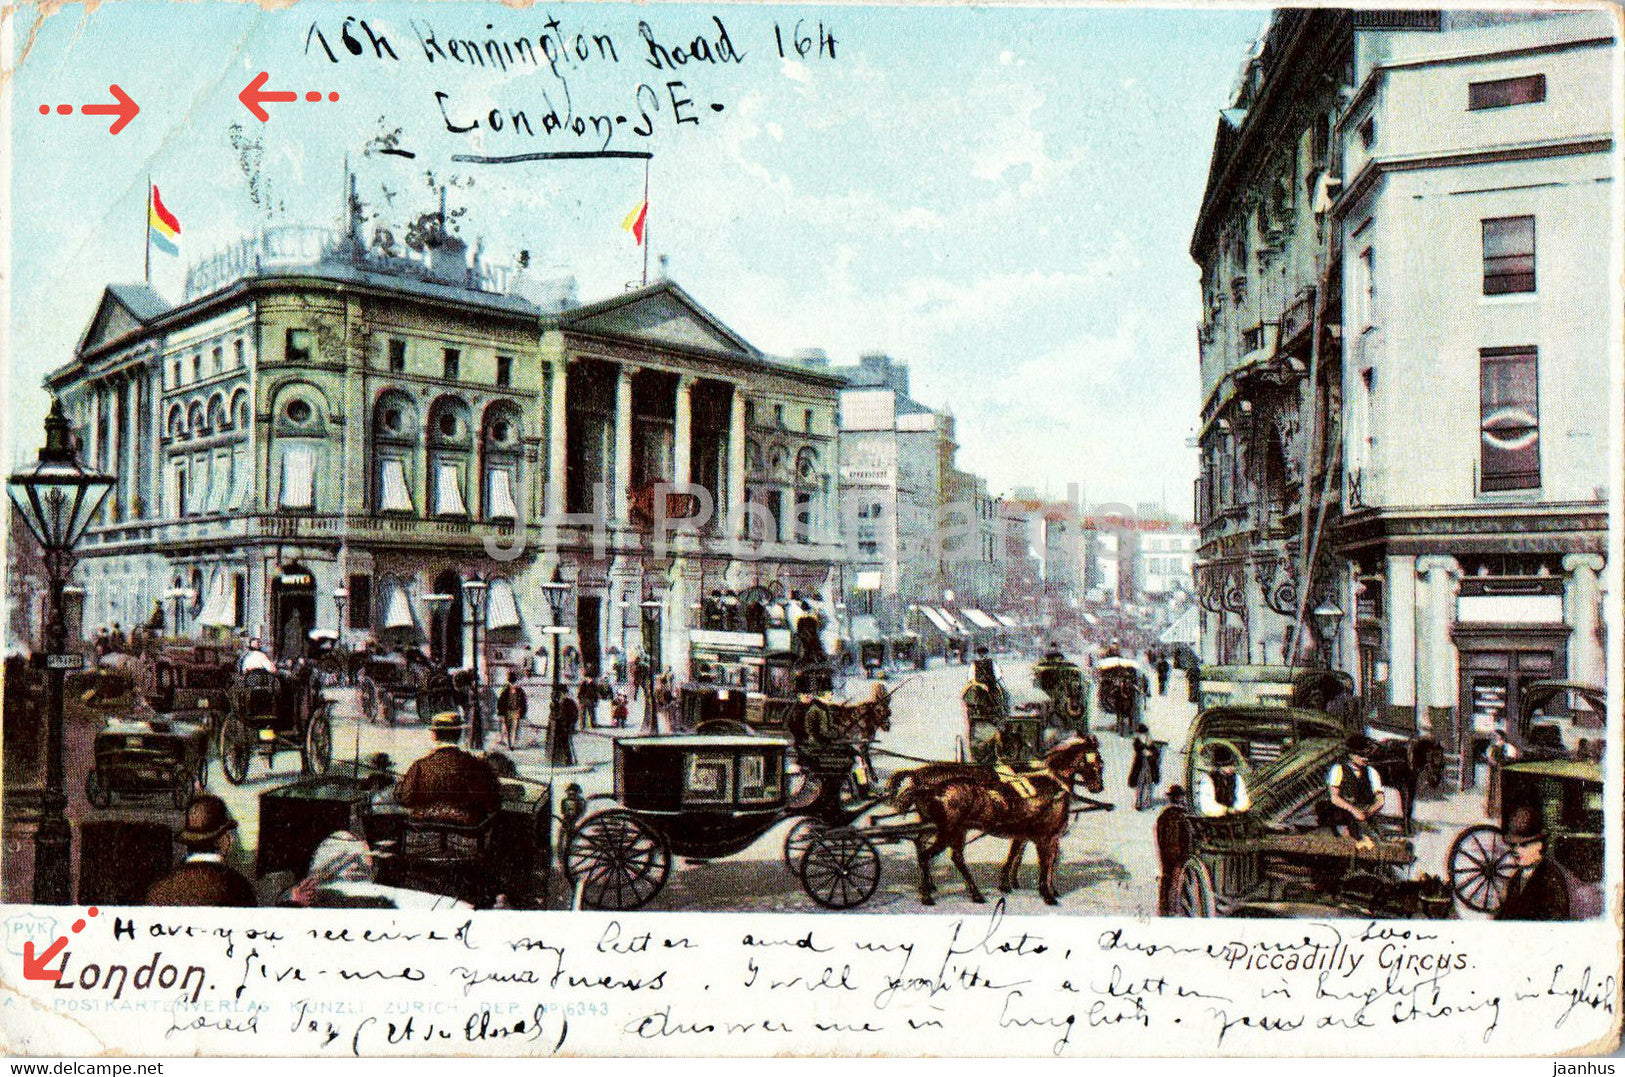 London - Piccadilly Circus - horse carriage - old postcard - 1902 - England - United Kingdom - used - JH Postcards